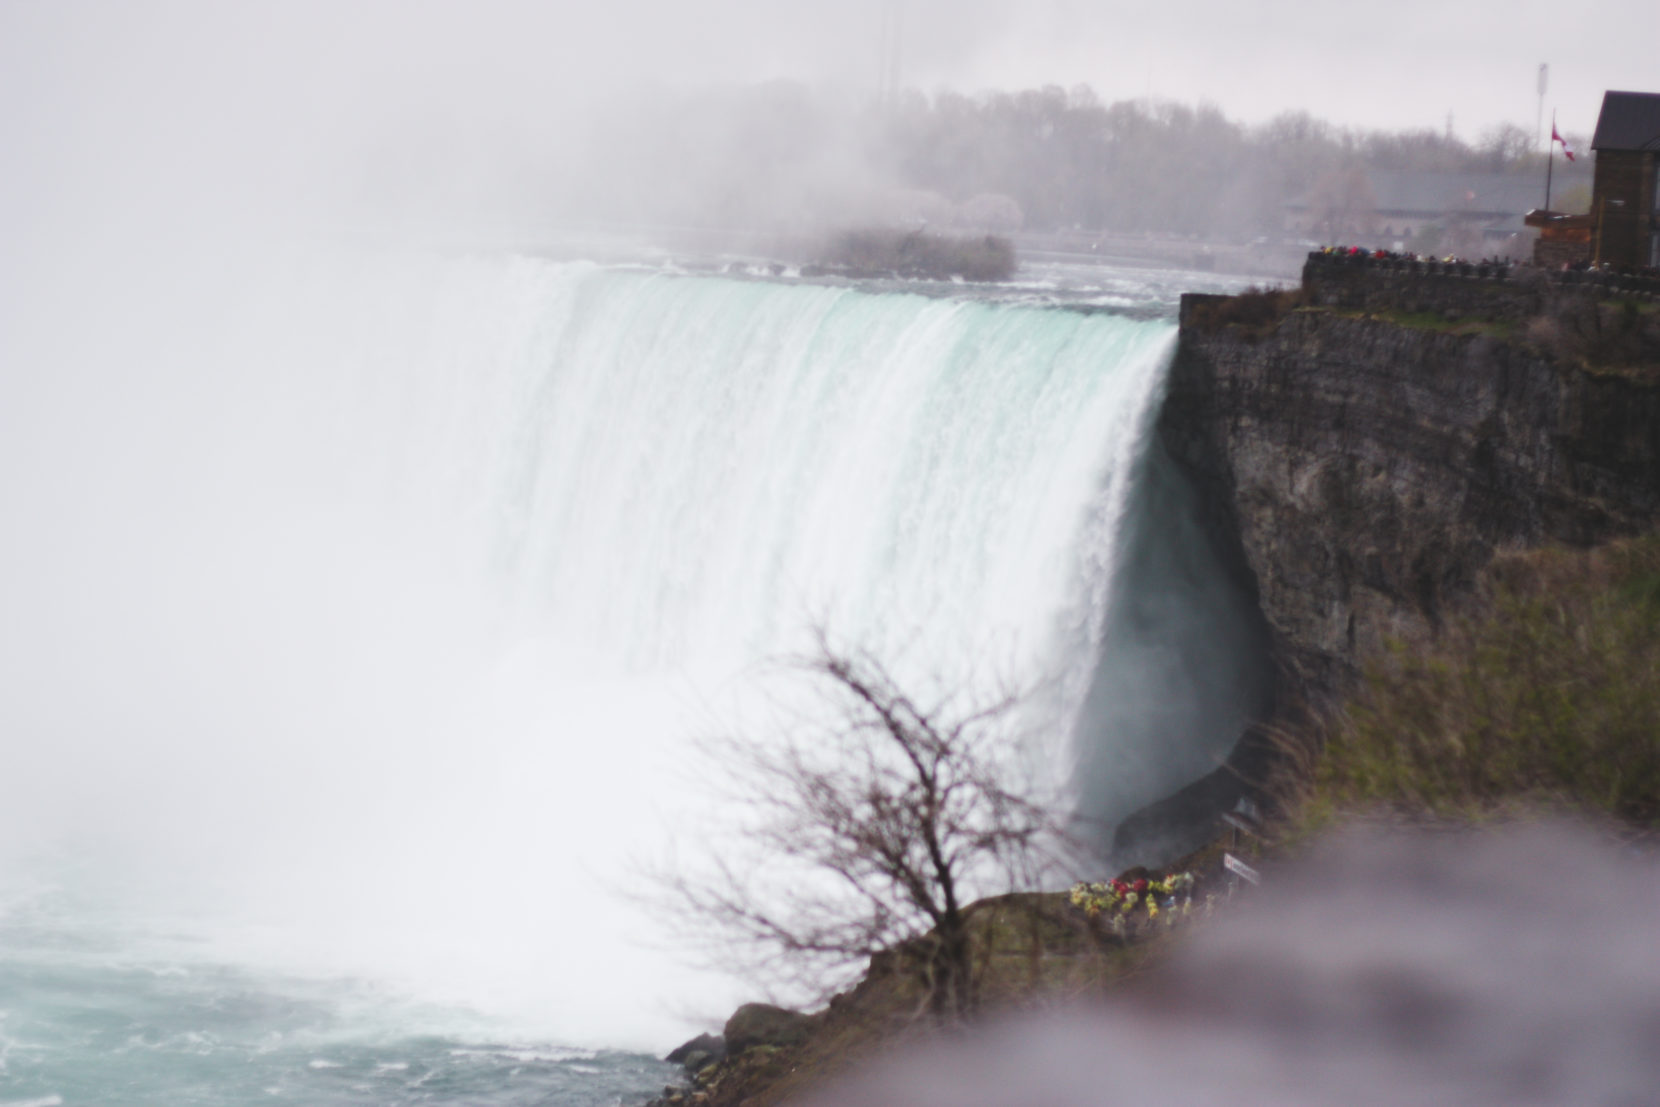 table rock center | horseshoe falls | niagara tourist guide | top instagram worthy locations